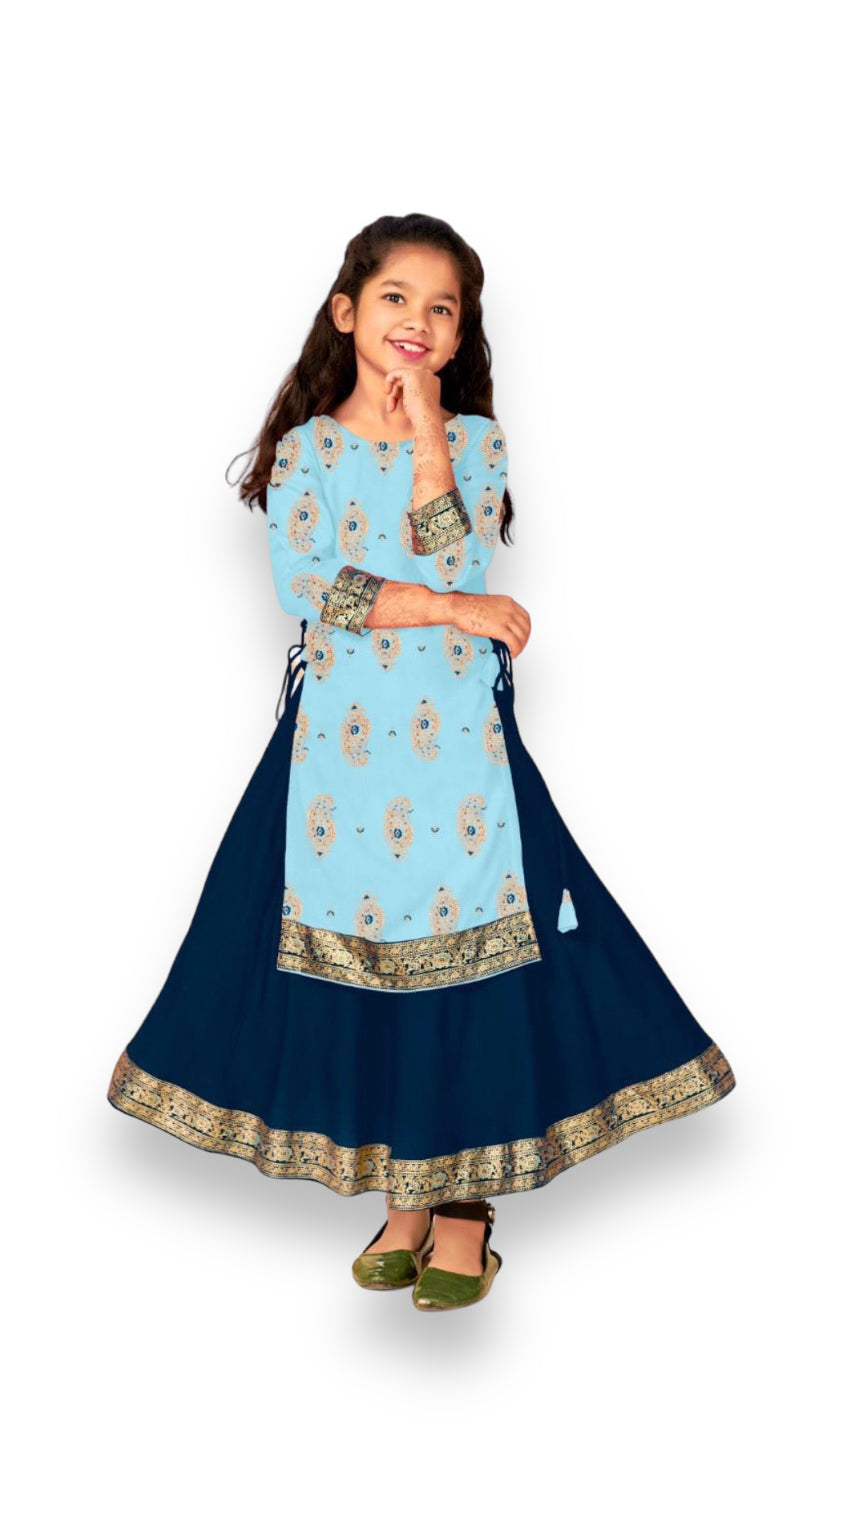 Elegant Girls' Rayon Gown-Style Dress: Graceful and Stylish